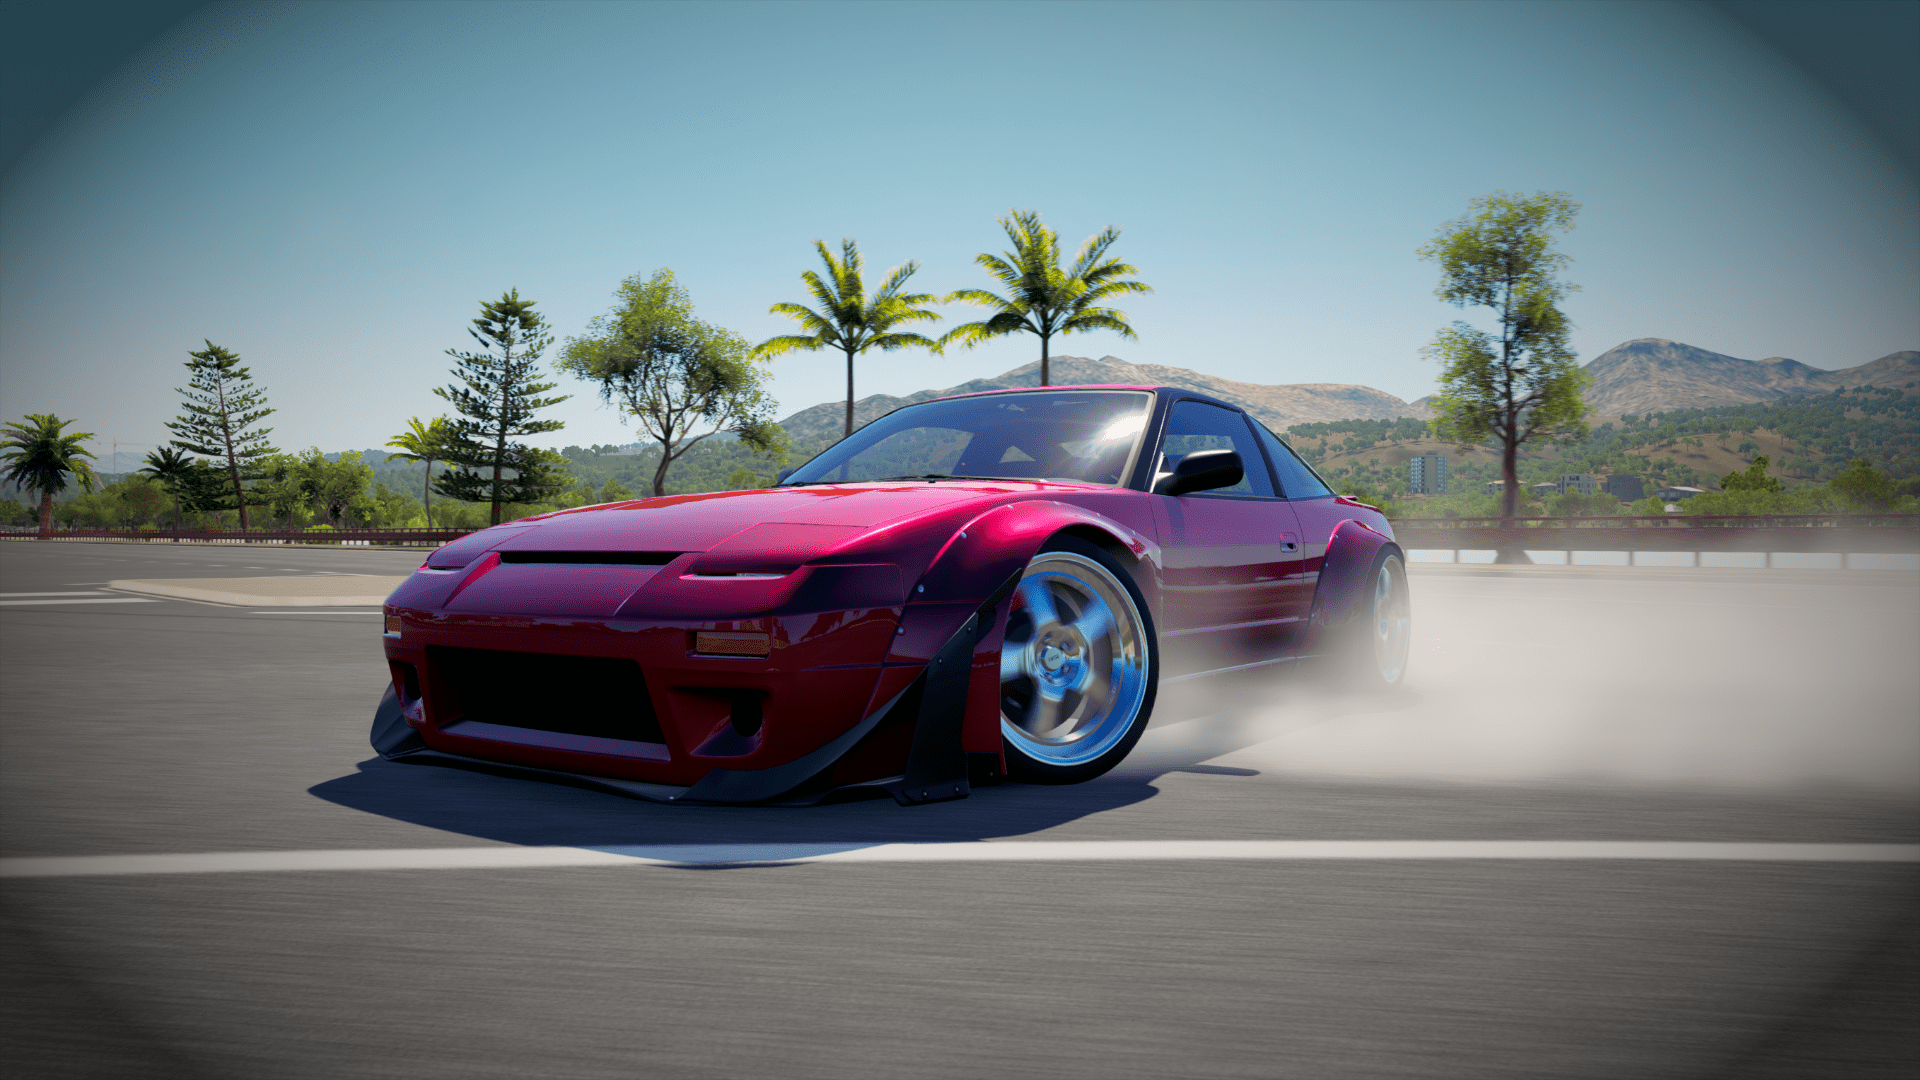 Nissan 240SX Wallpapers Top Free Nissan 240SX Backgrounds 